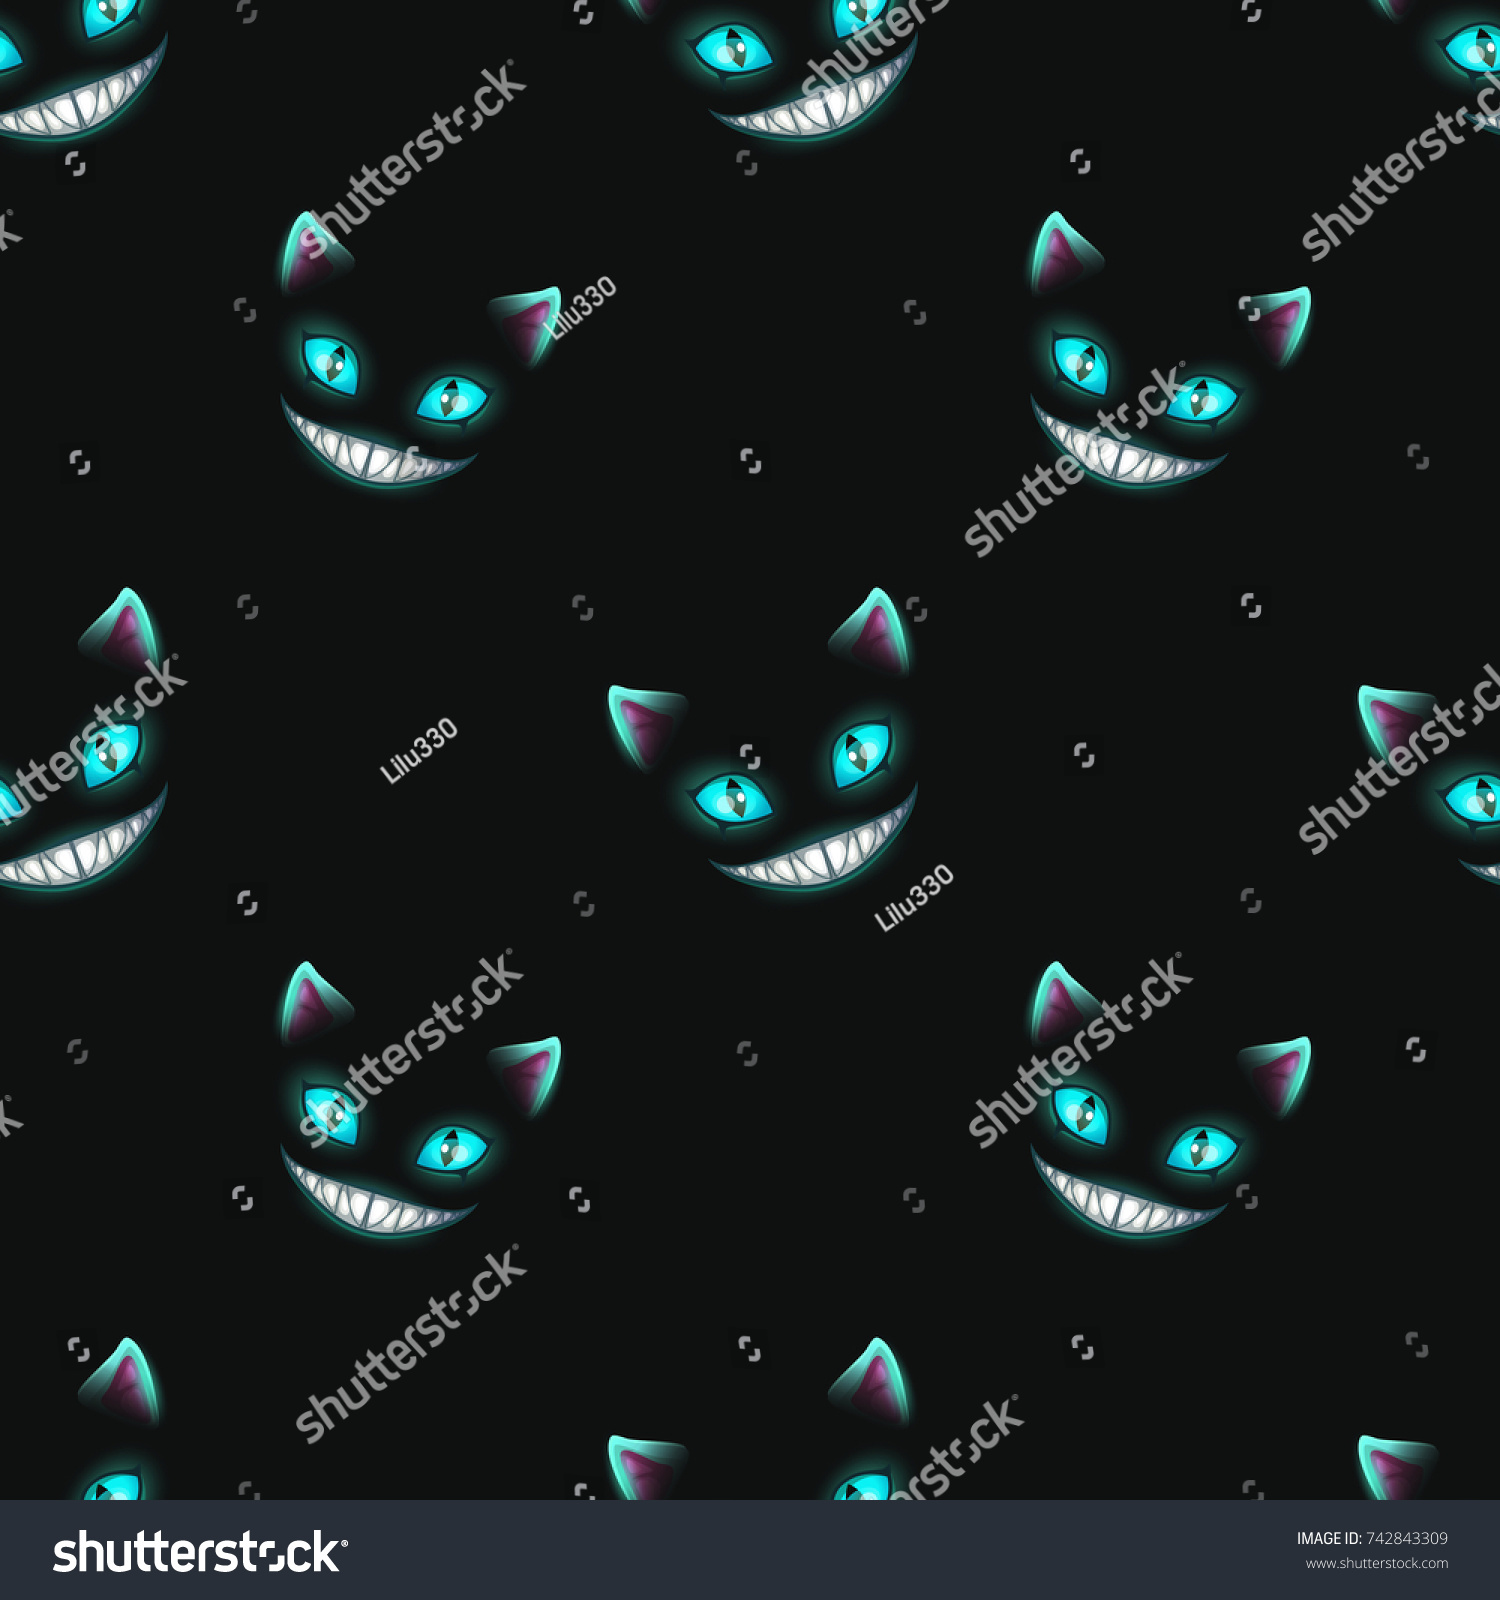 SVG of Seamless pattern with disappearing cat faces on black background. Cheshire Cat texture. Vector illustration. svg